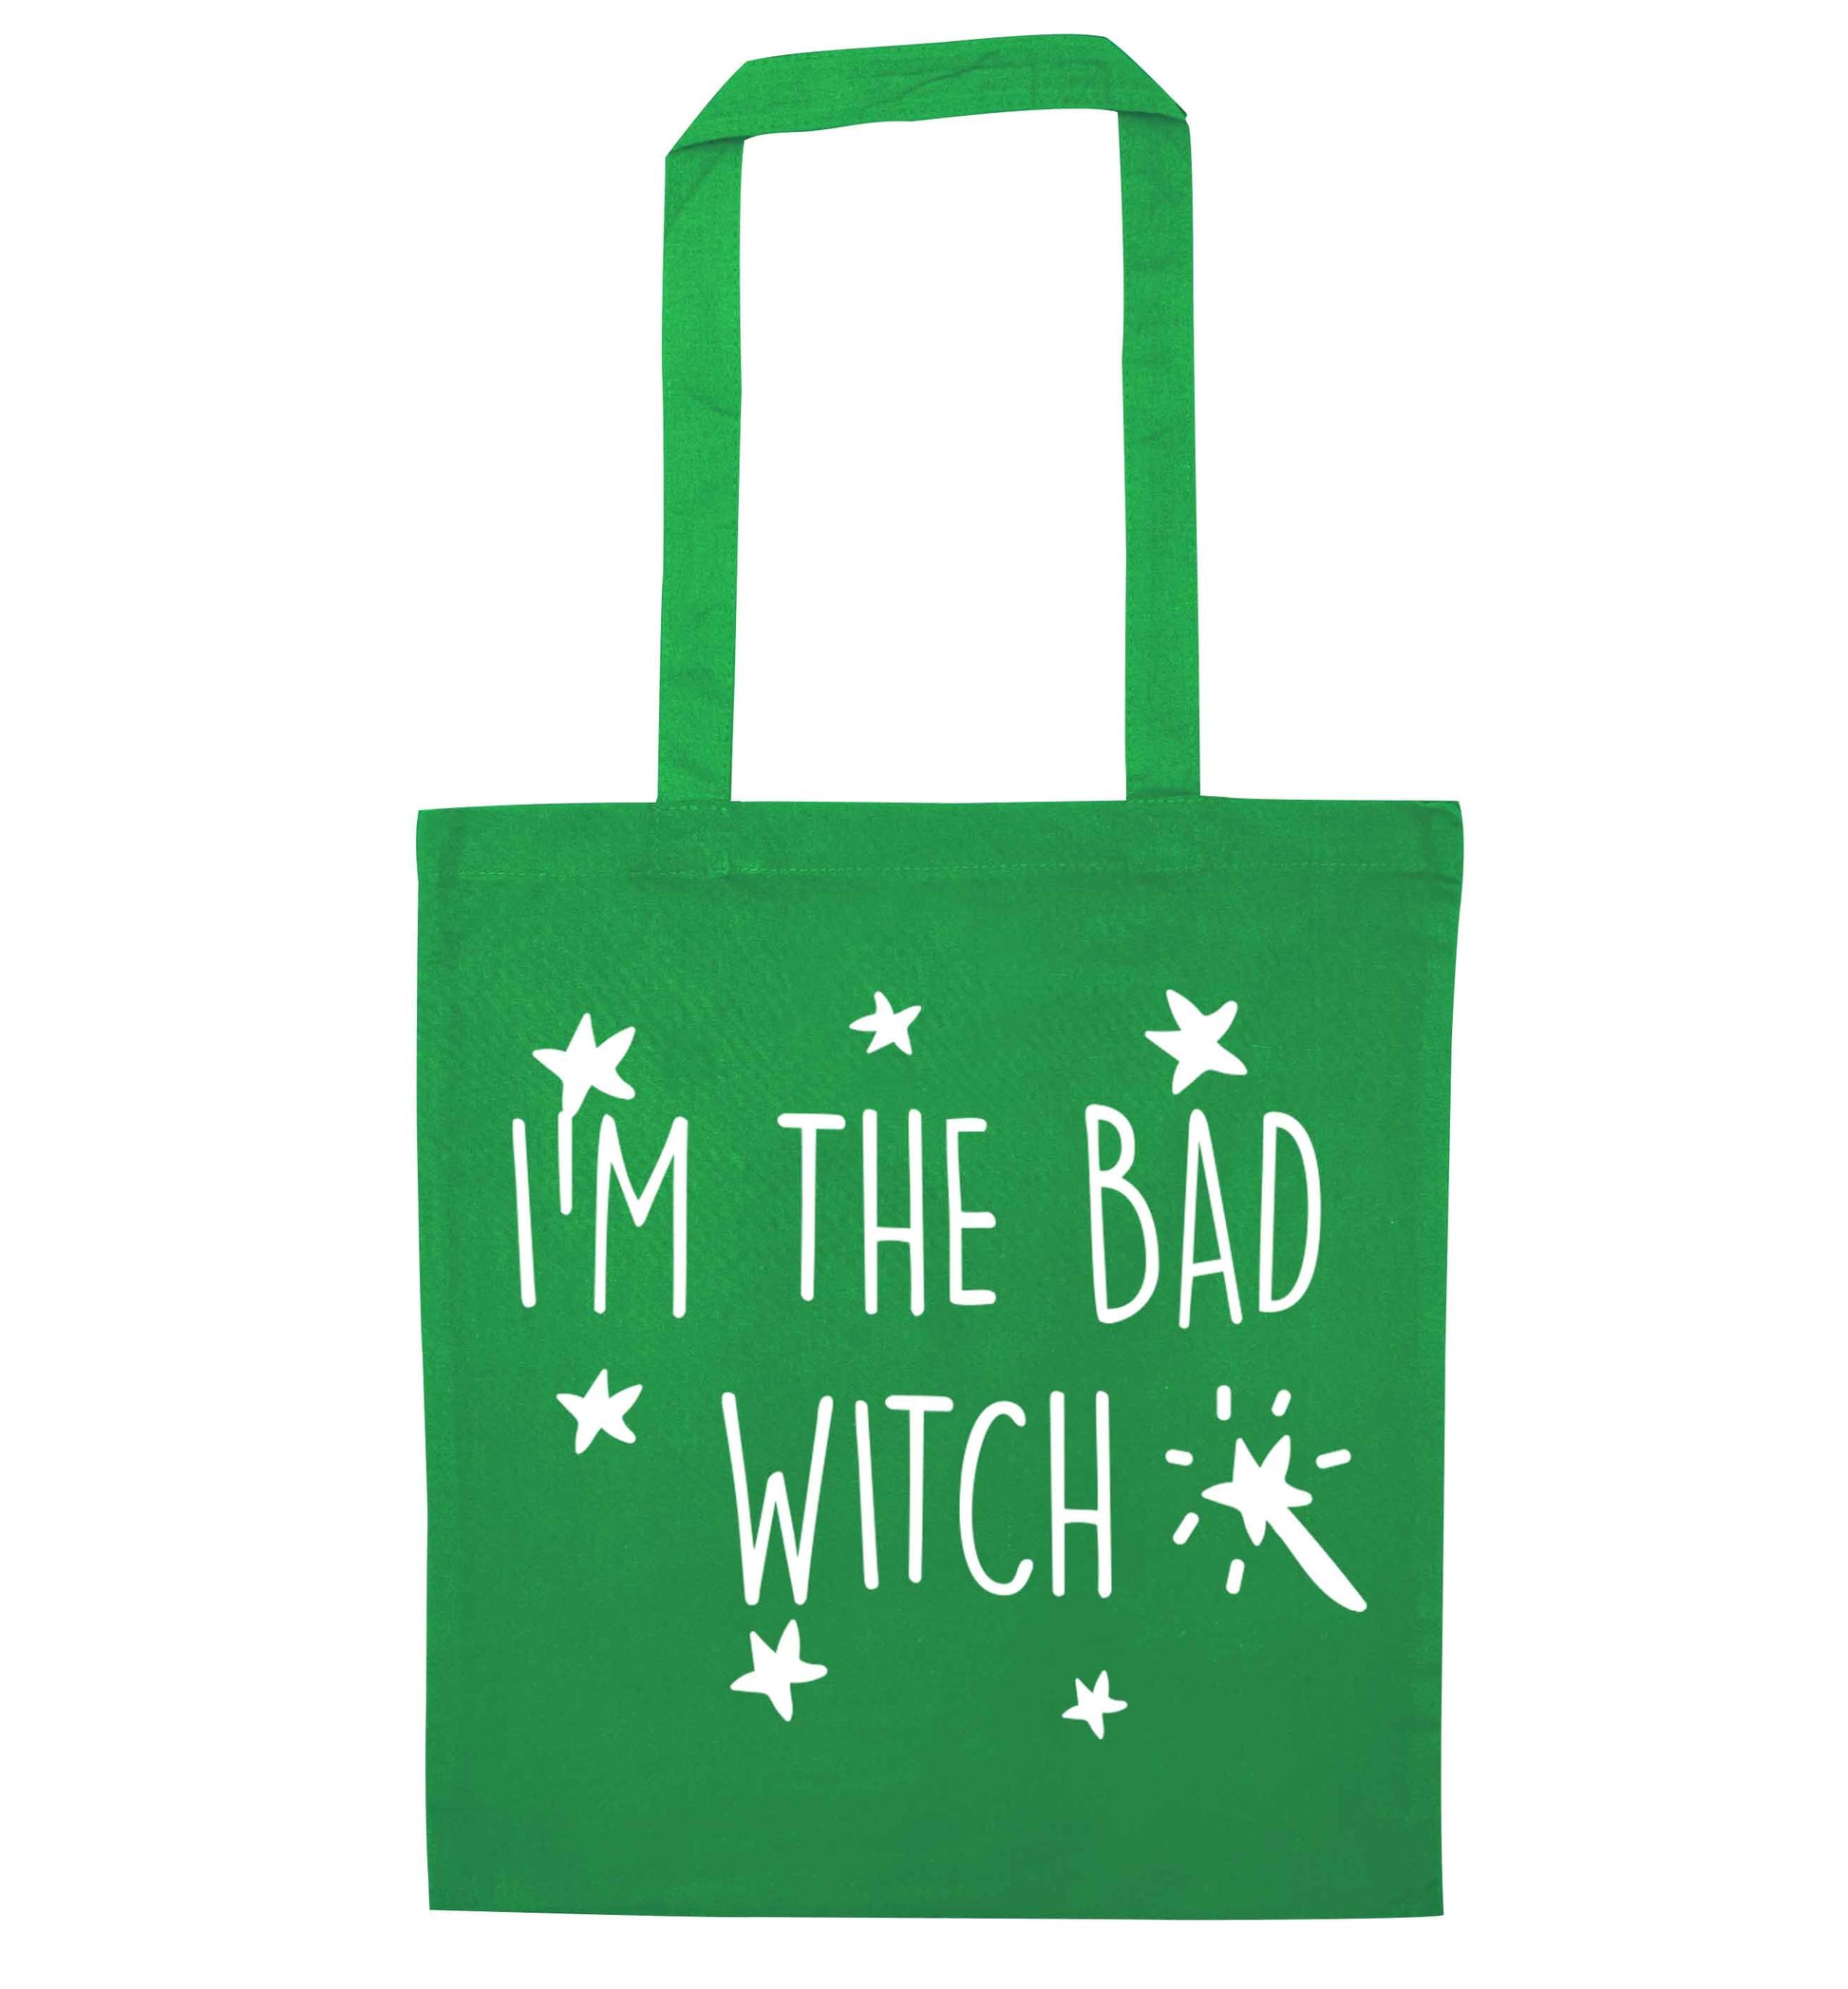 Bad witch green tote bag